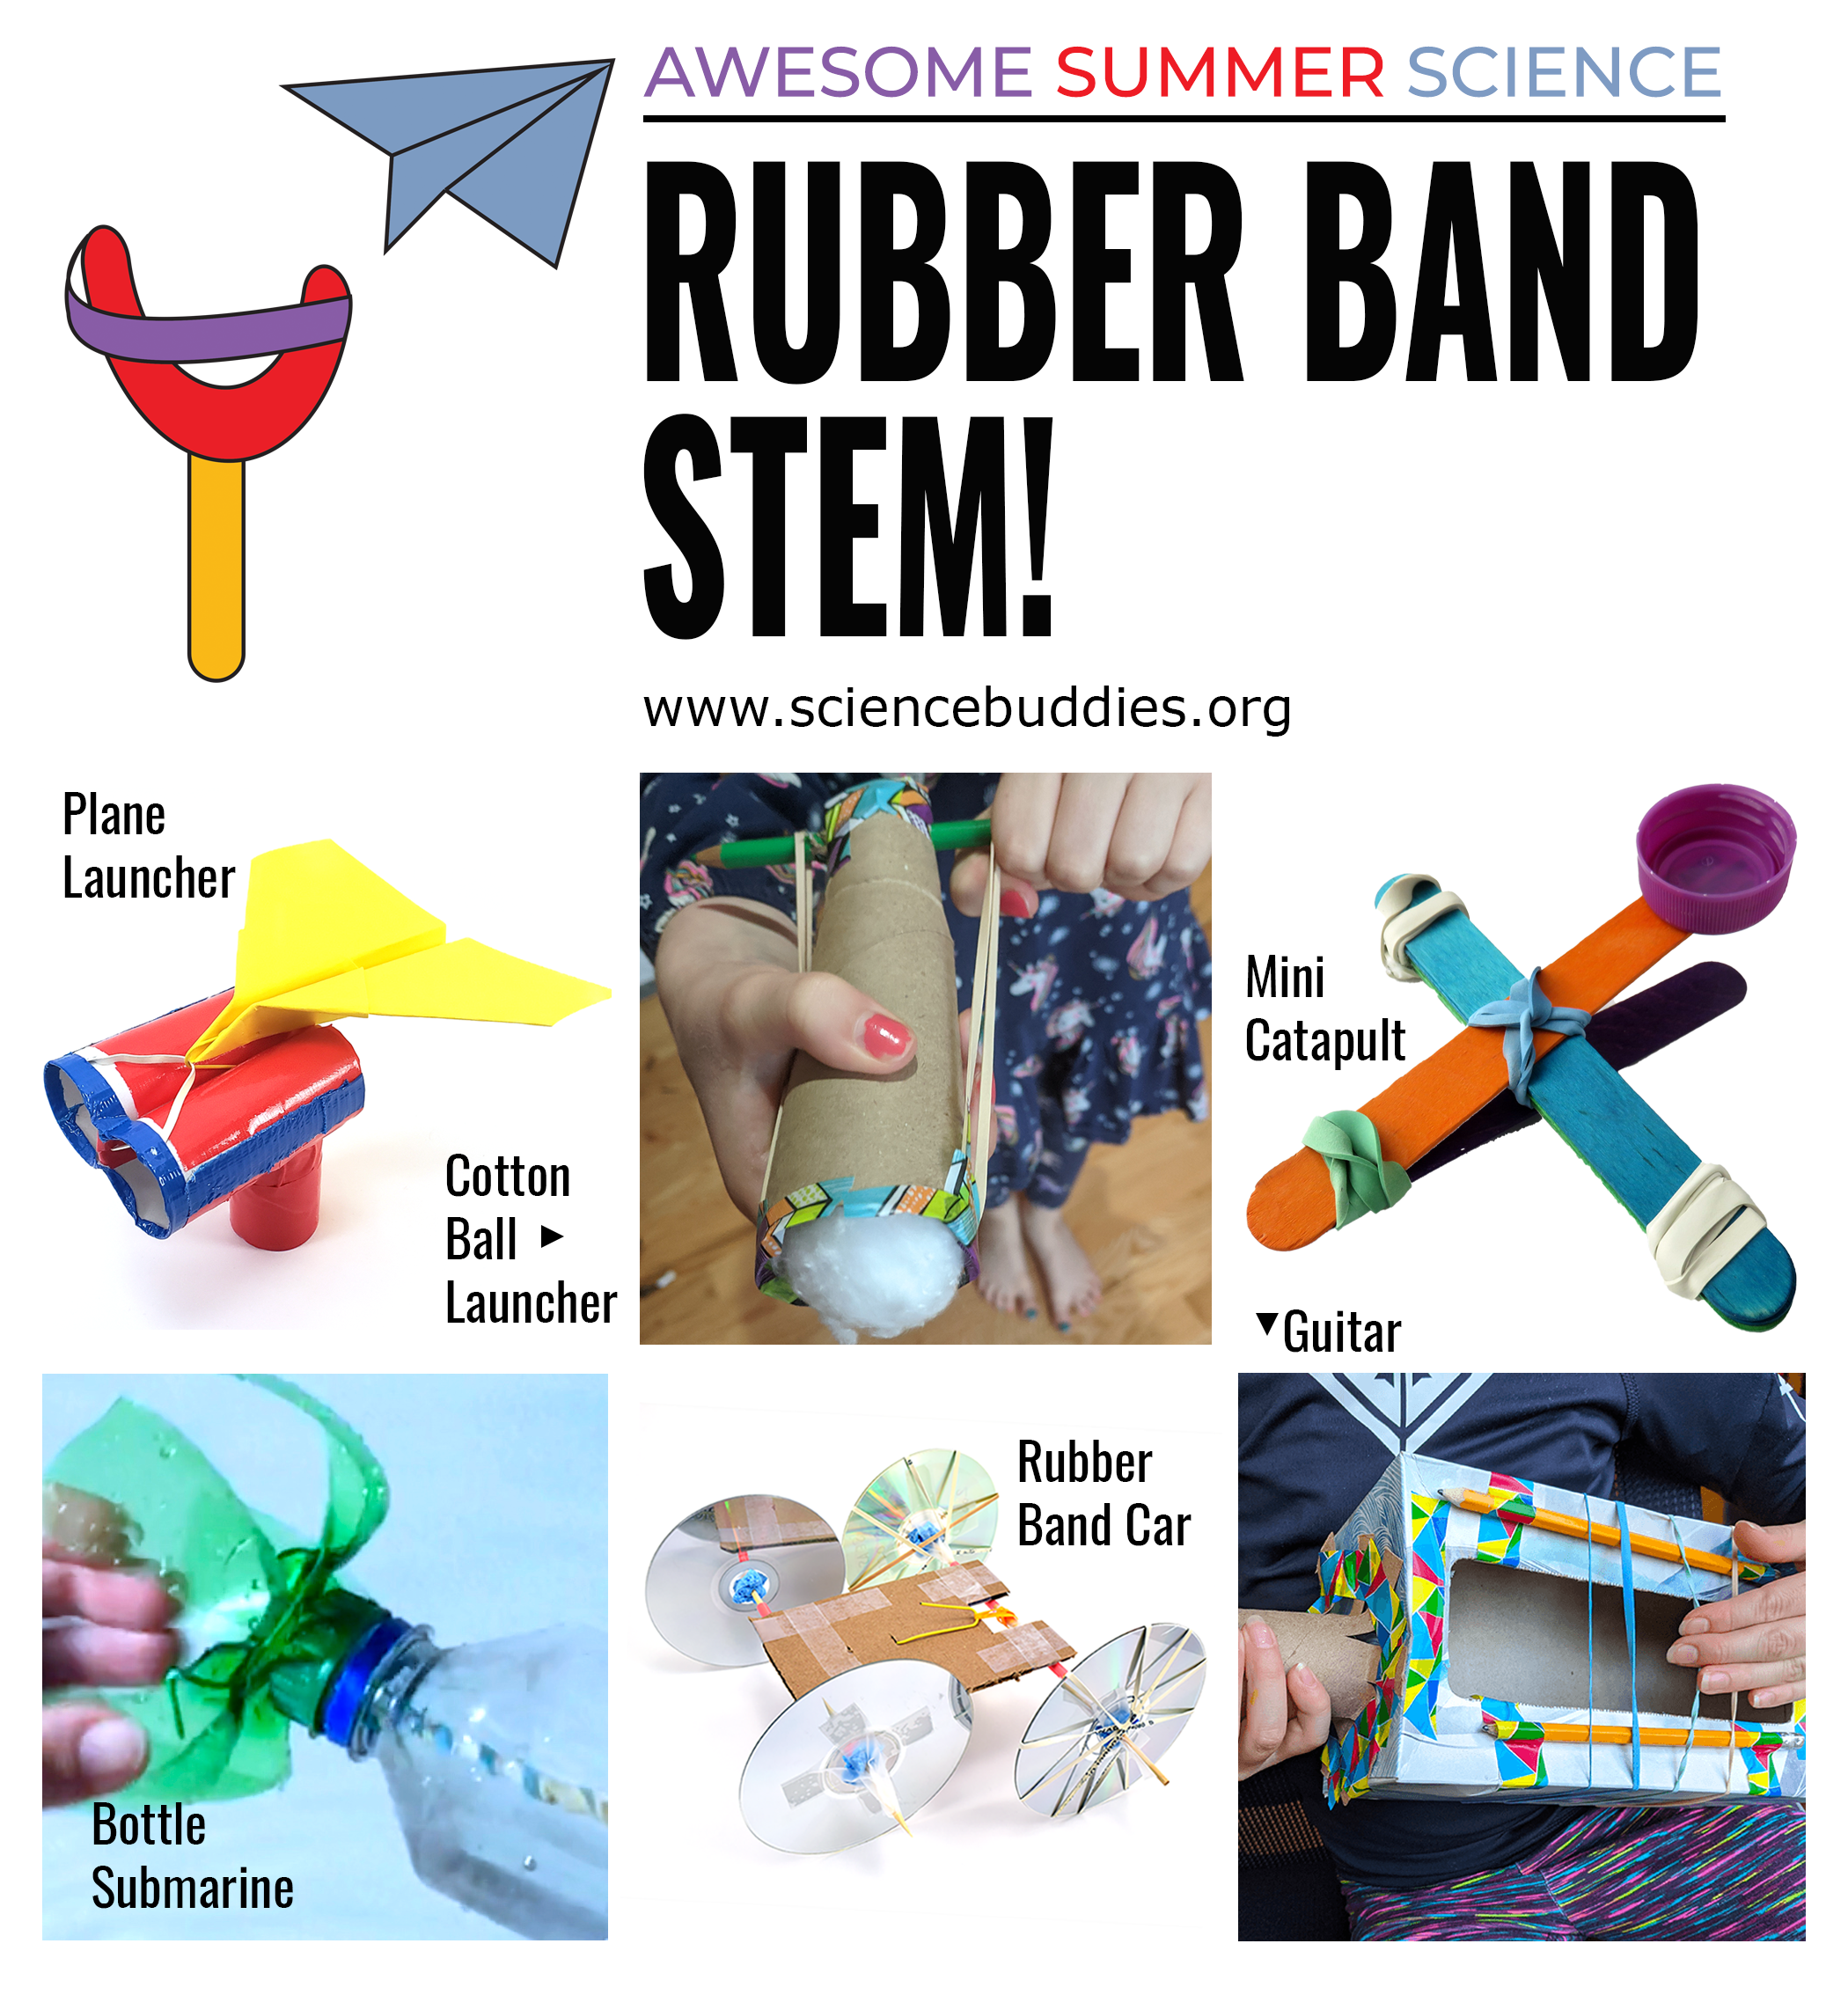 Rubber band stem activities, including rubber band guitar, rubber band car, paper airplane launcher, and popsicle stick catapult - part of Awesome Summer Science Experiments series